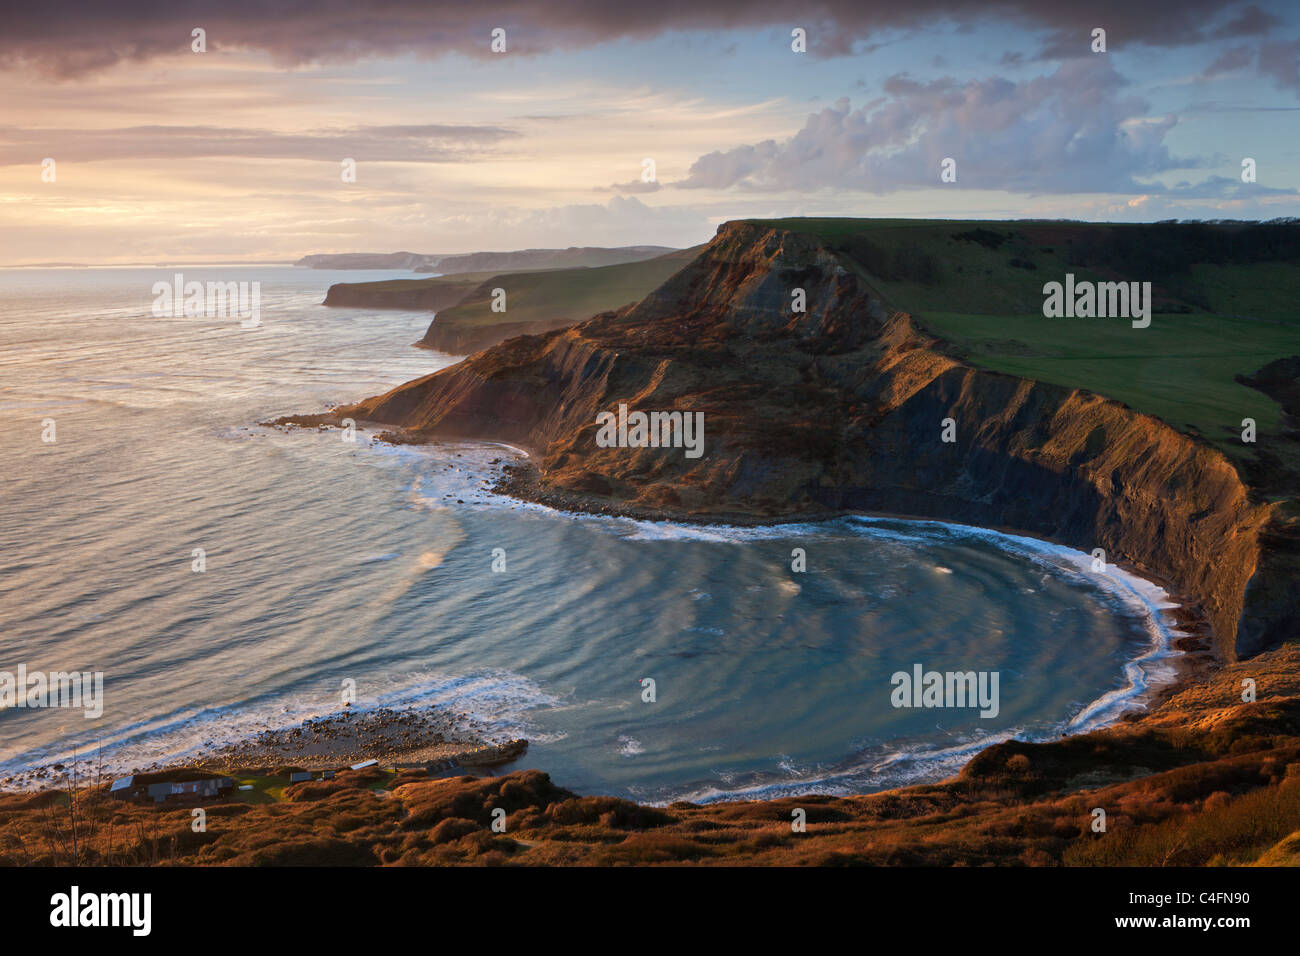 Storm light illuminates Chapmans Pool and Houns Tout cliff, viewed from St Aldhelm's Head, Dorset, England. Stock Photo